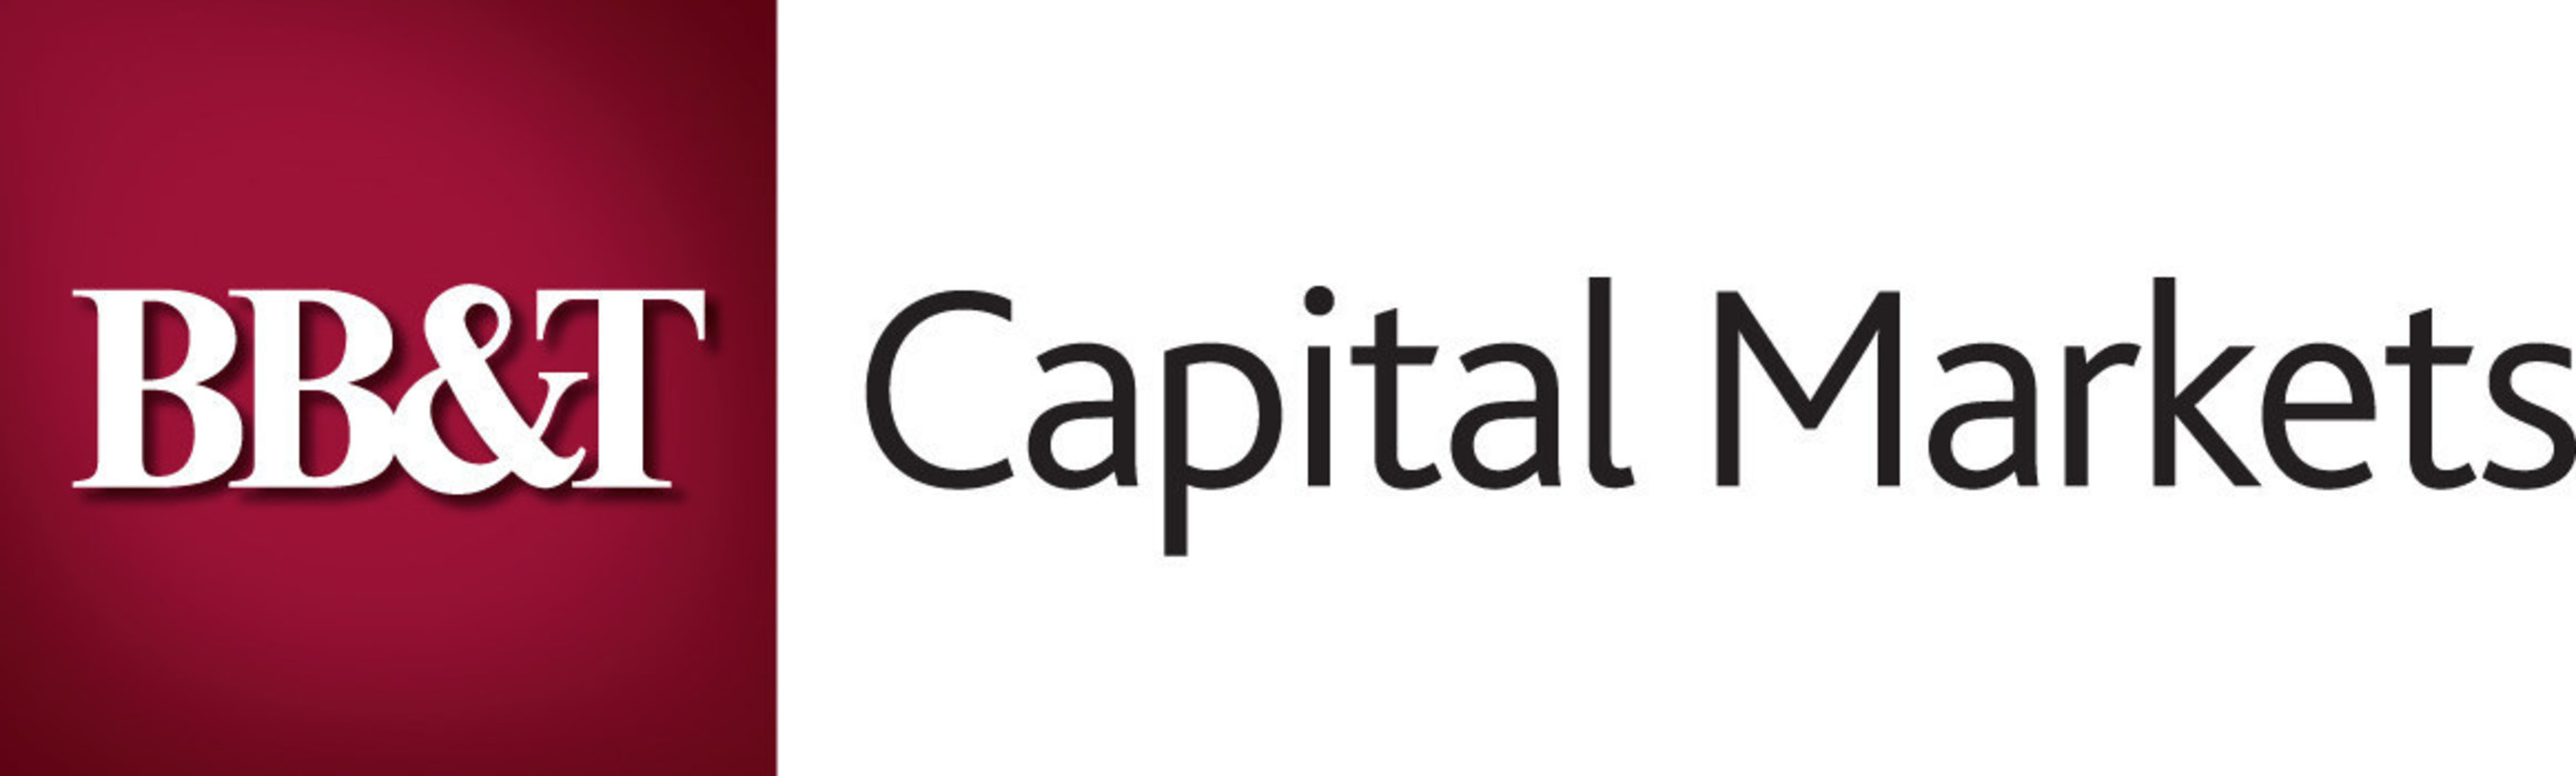 What Is BB&T Capital Markets